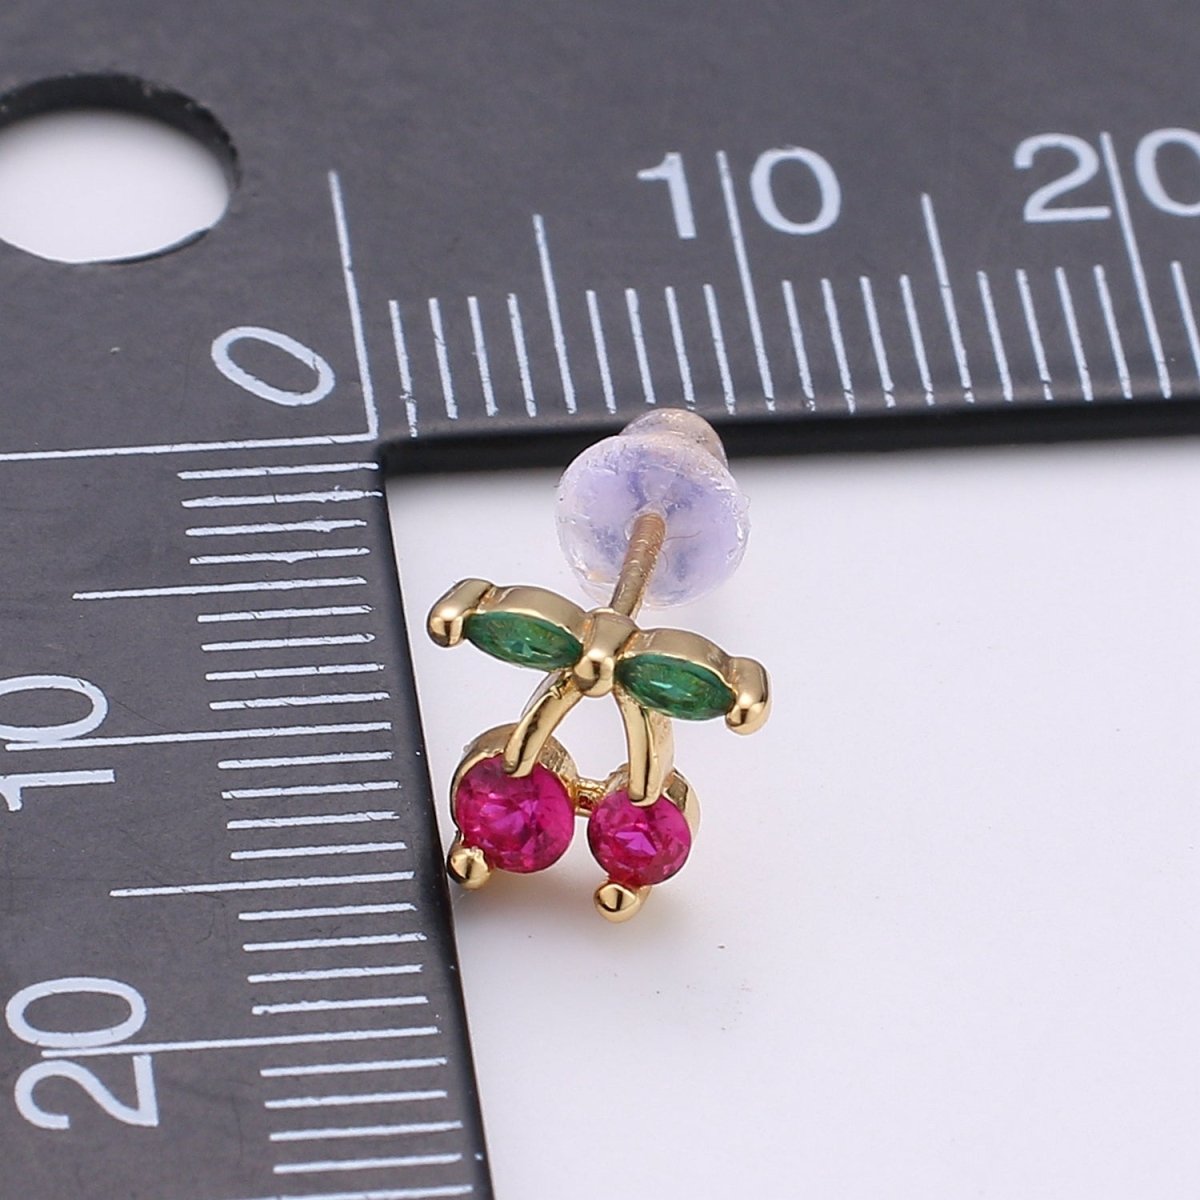 1pair Purple Crystal Cherry Fruits Studs Earrings CZ Floral Color Fruit Casual Daily Wear Earring Jewelry Q-393 - DLUXCA